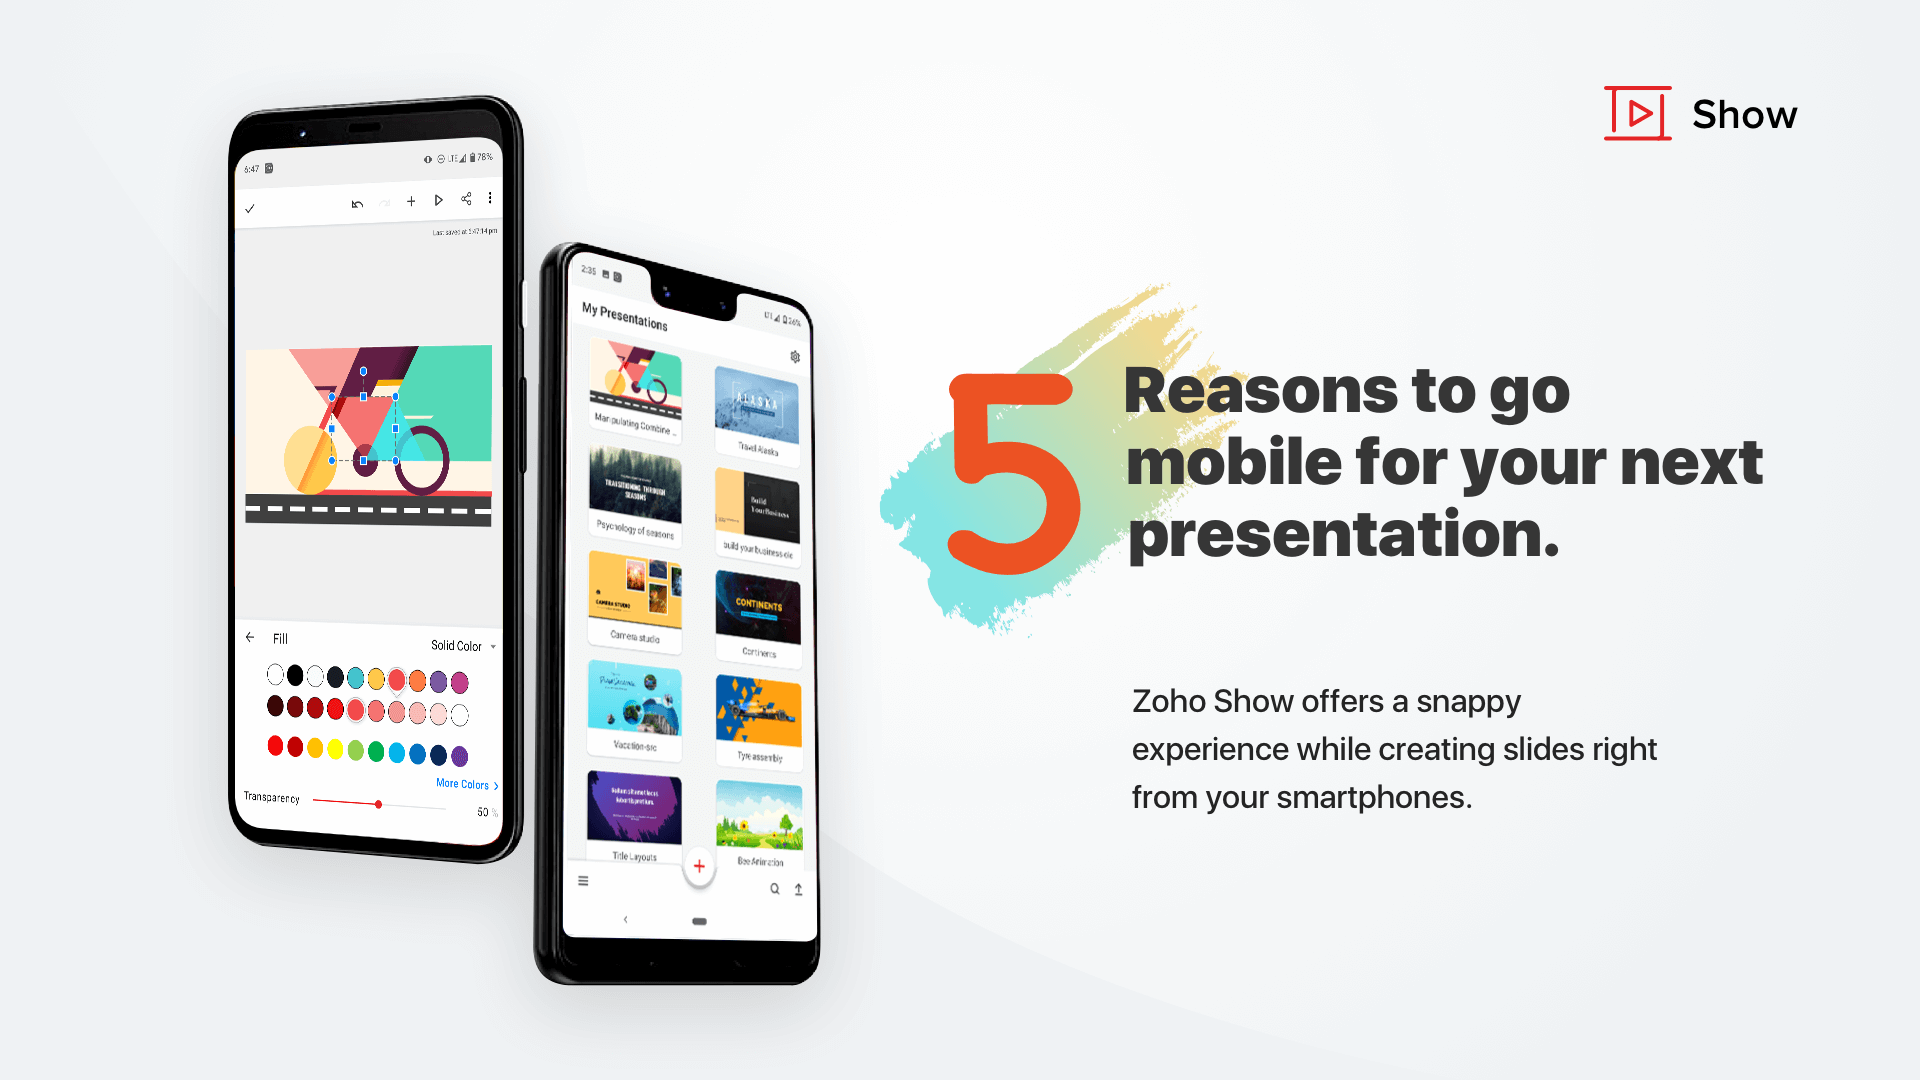 5 reasons to go mobile for your next presentation